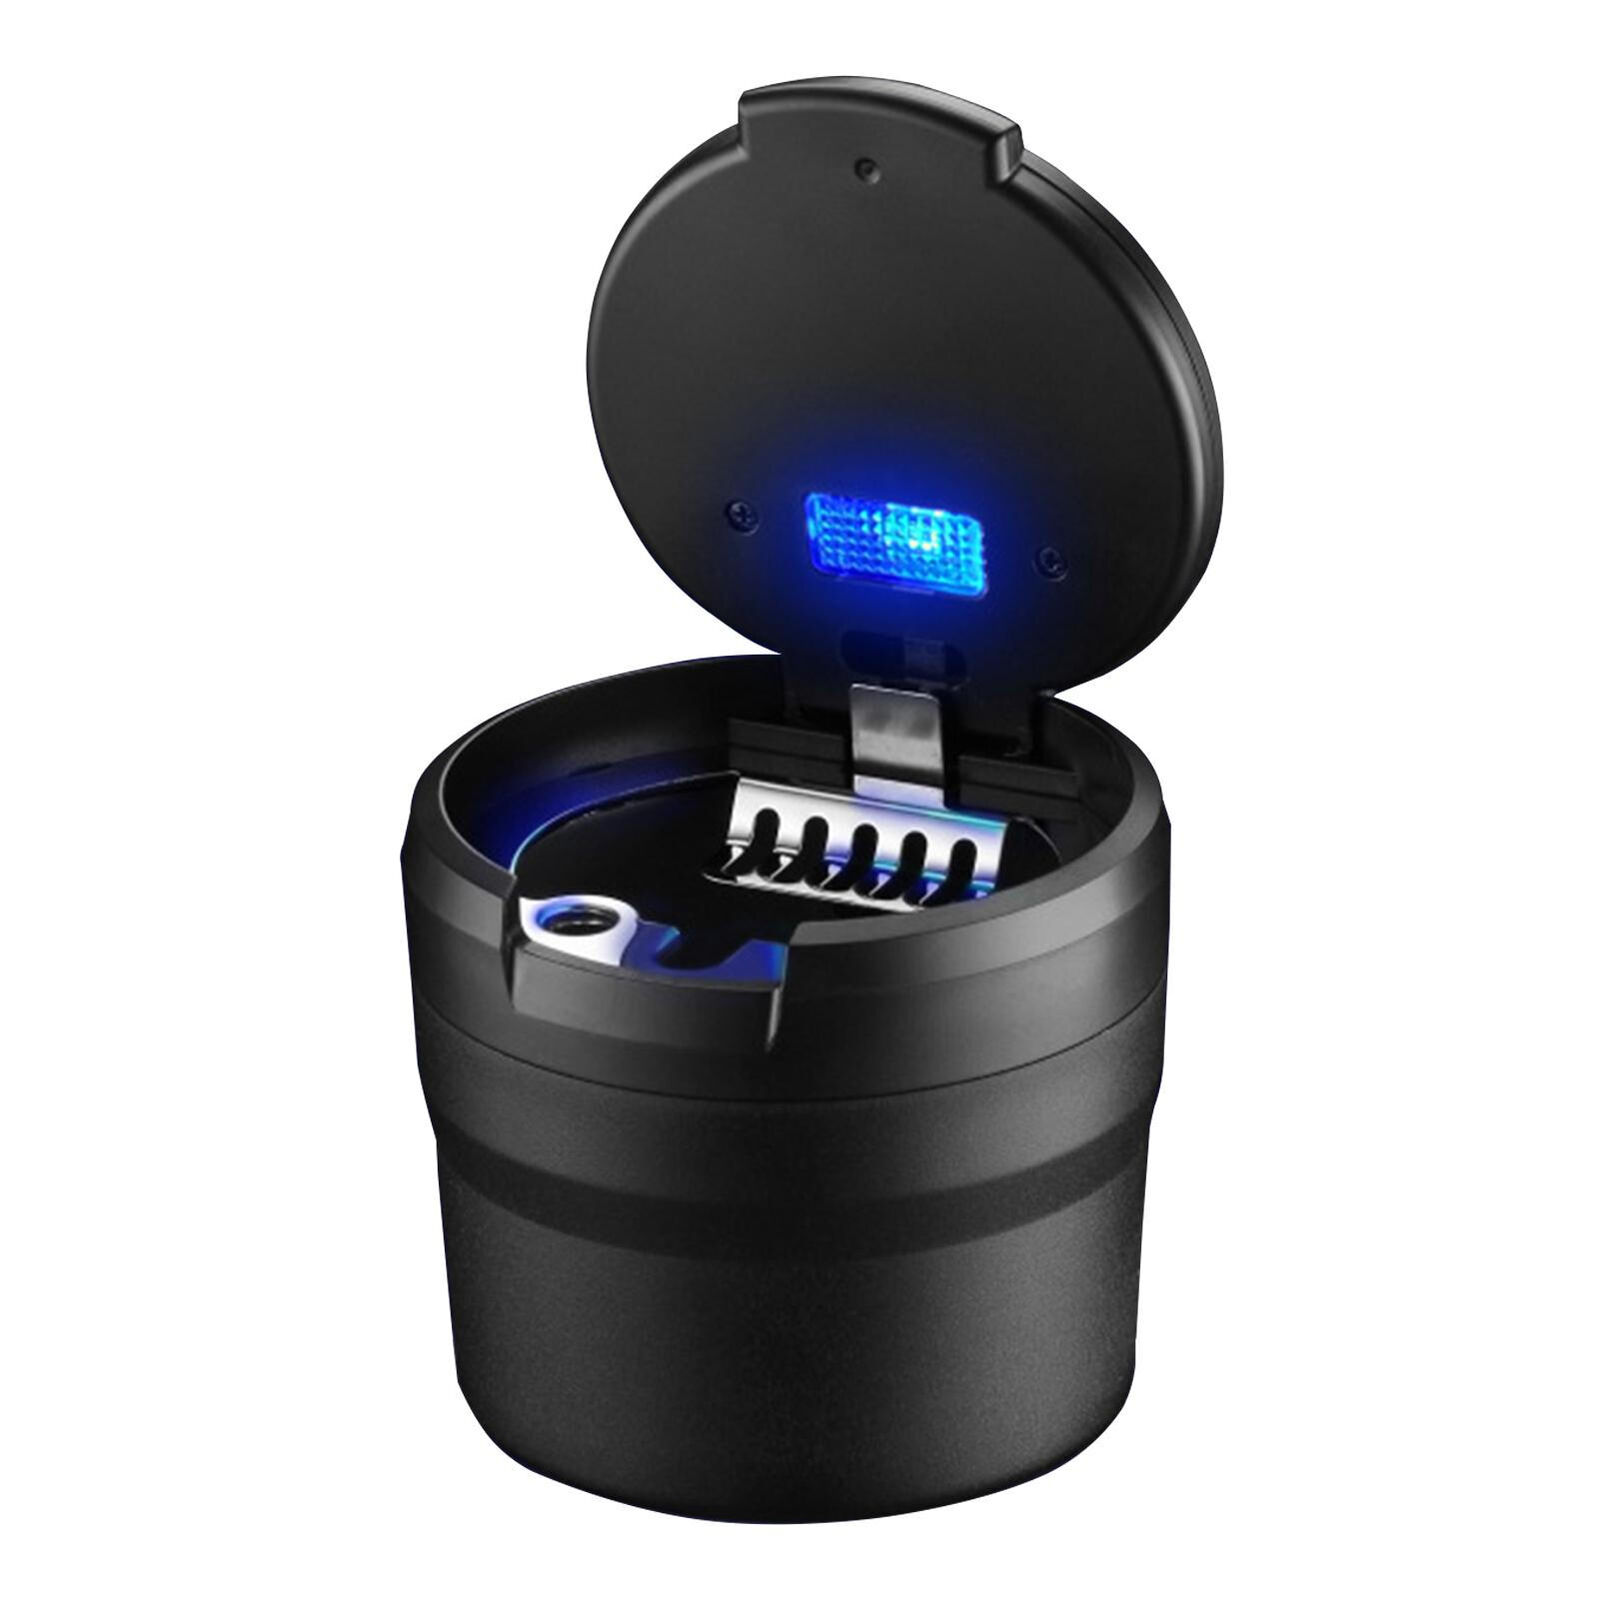 Portable Car Ashtray Cigarette Cylinder Smokeless Cup Holder LED Light with Lid